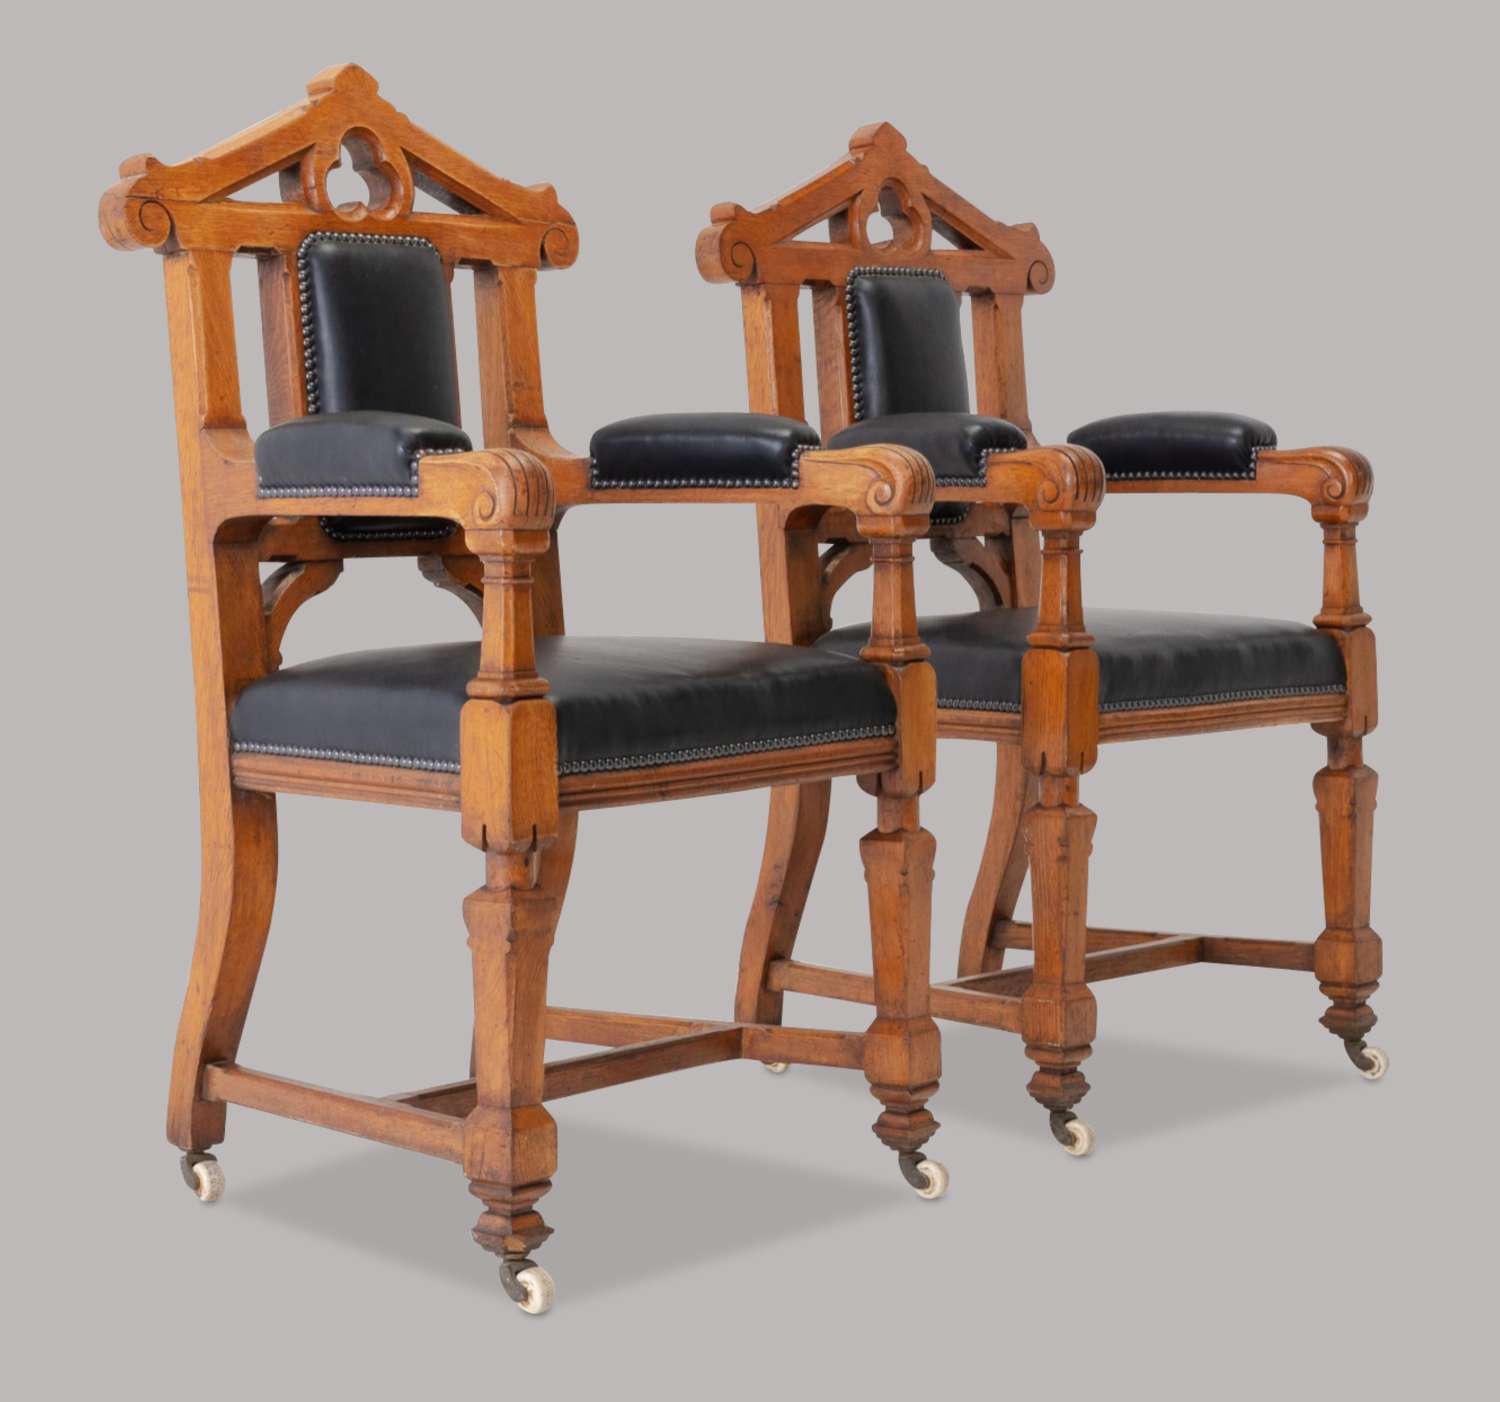 An unusual C19th pair of golden oak and leather open armchairs